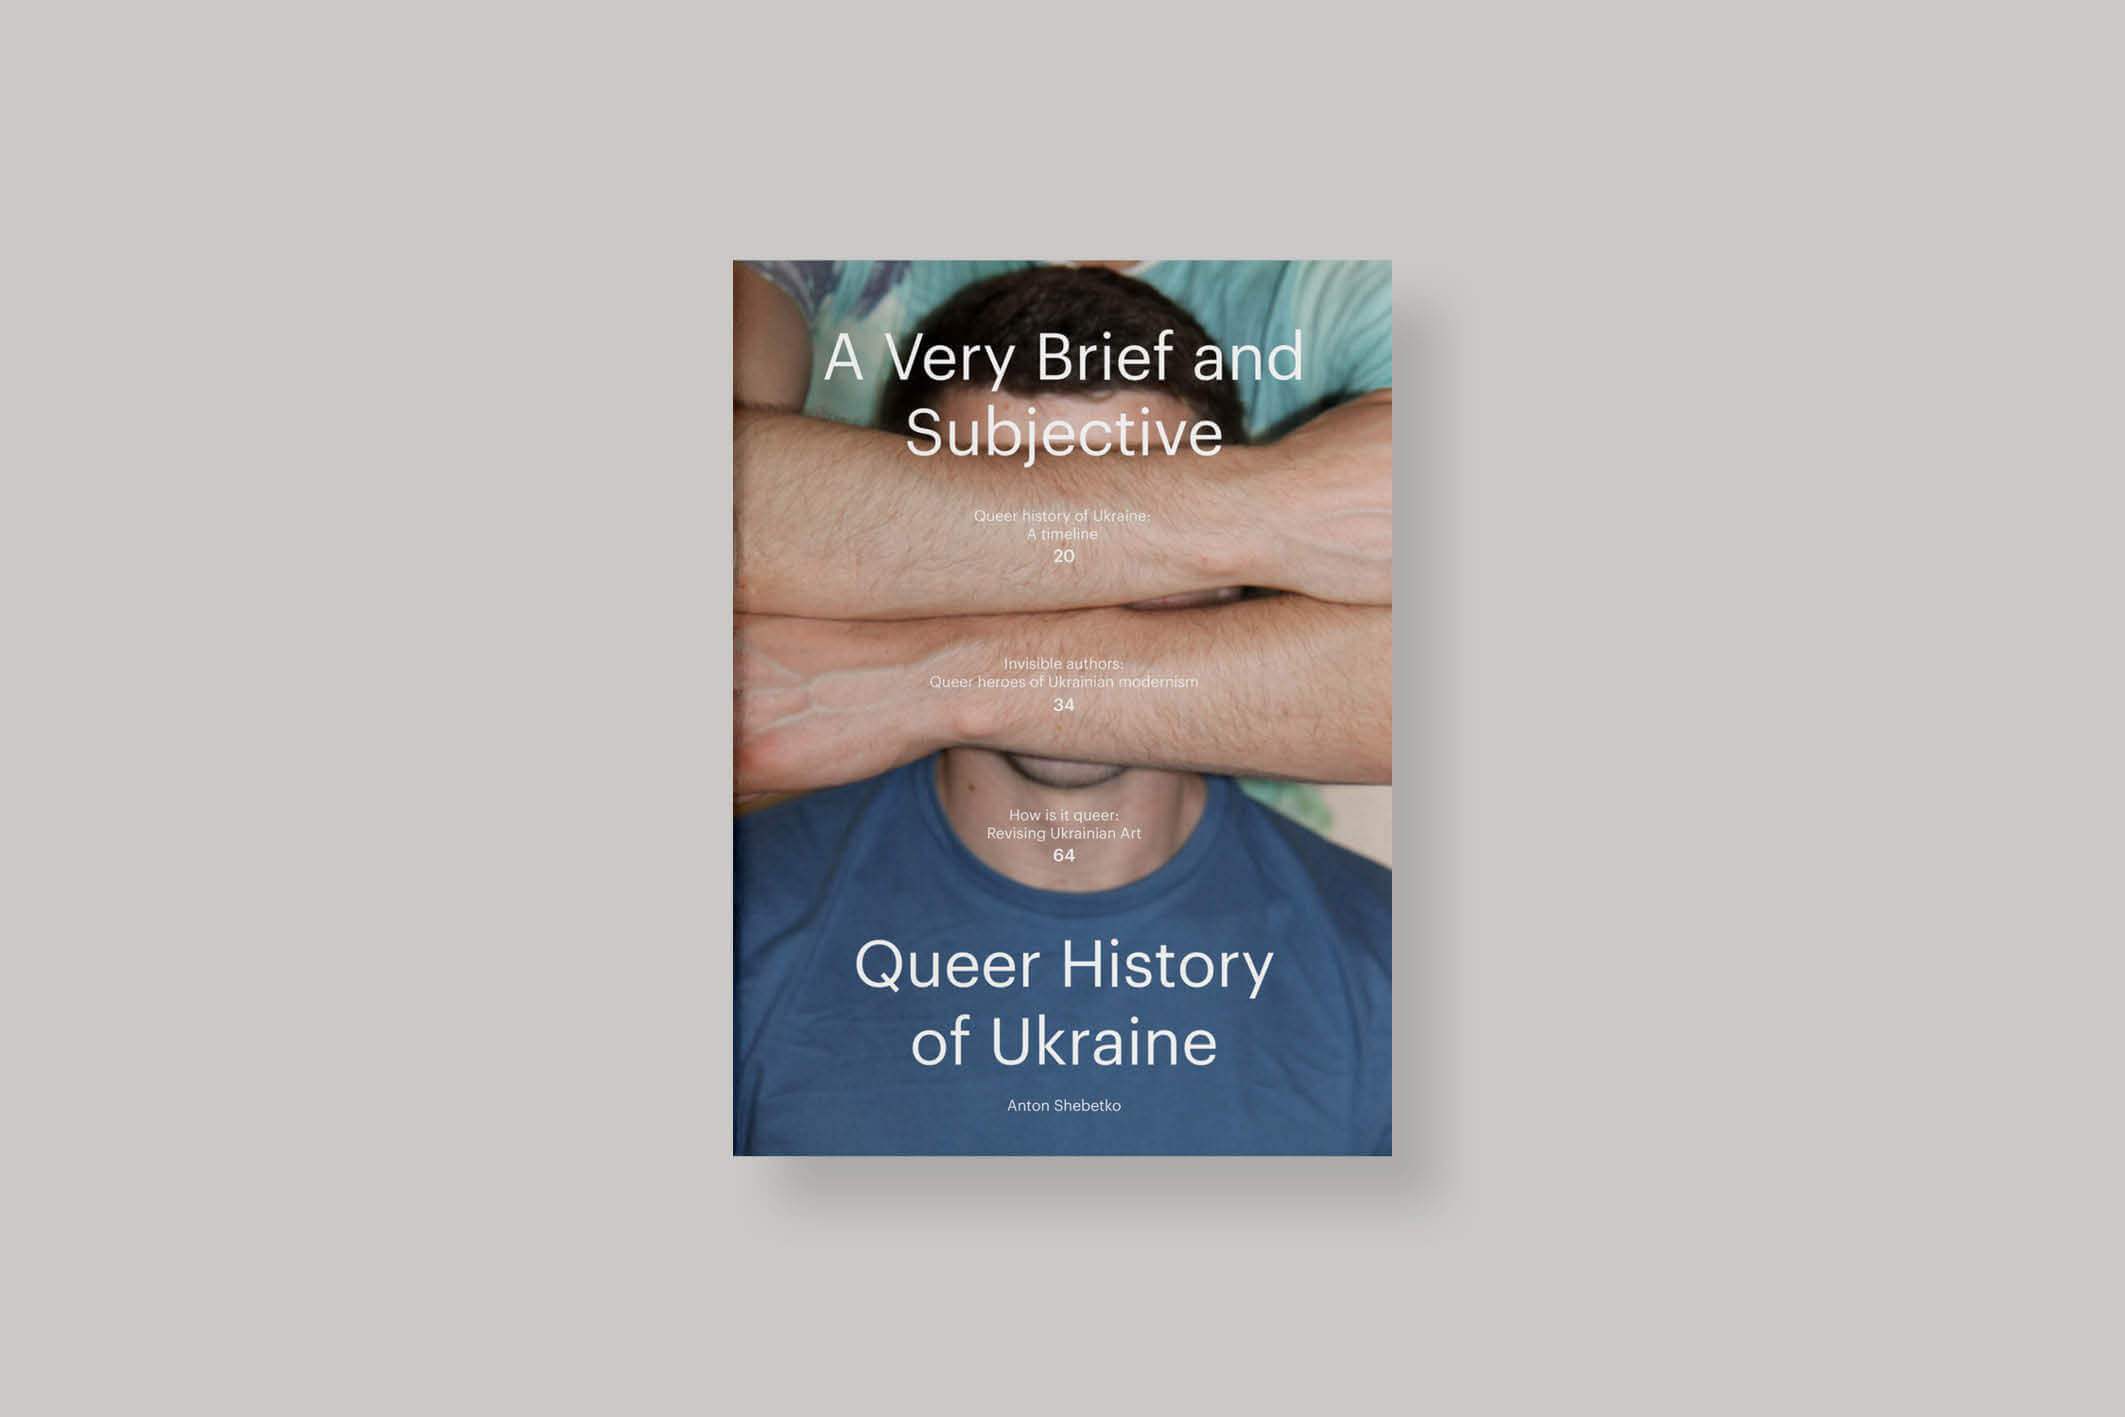 a-very-brief-and-subjective-queer-history-of-ukraine-shebetko-cover